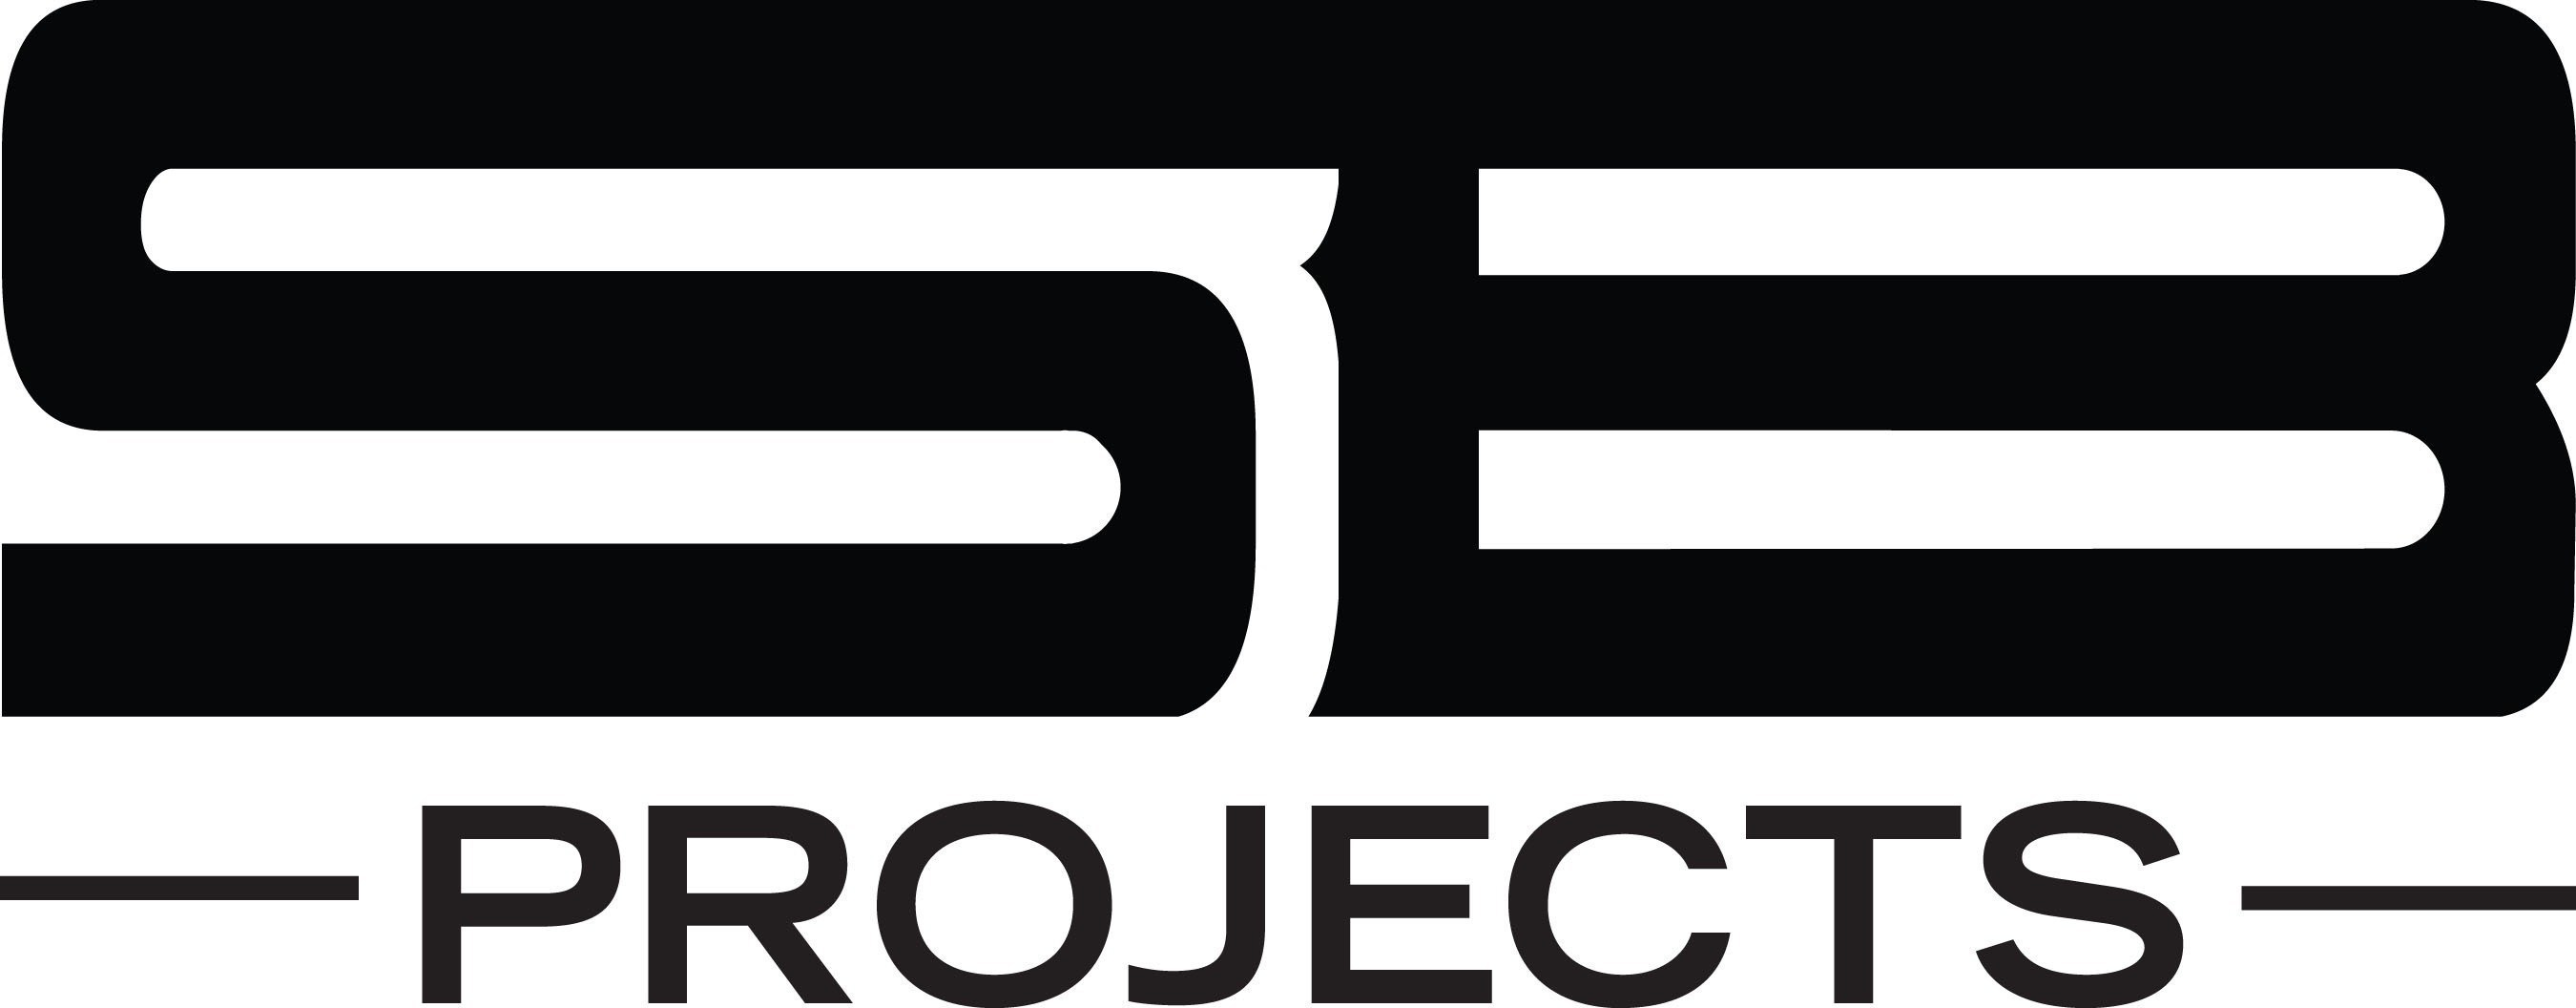 SB Projects